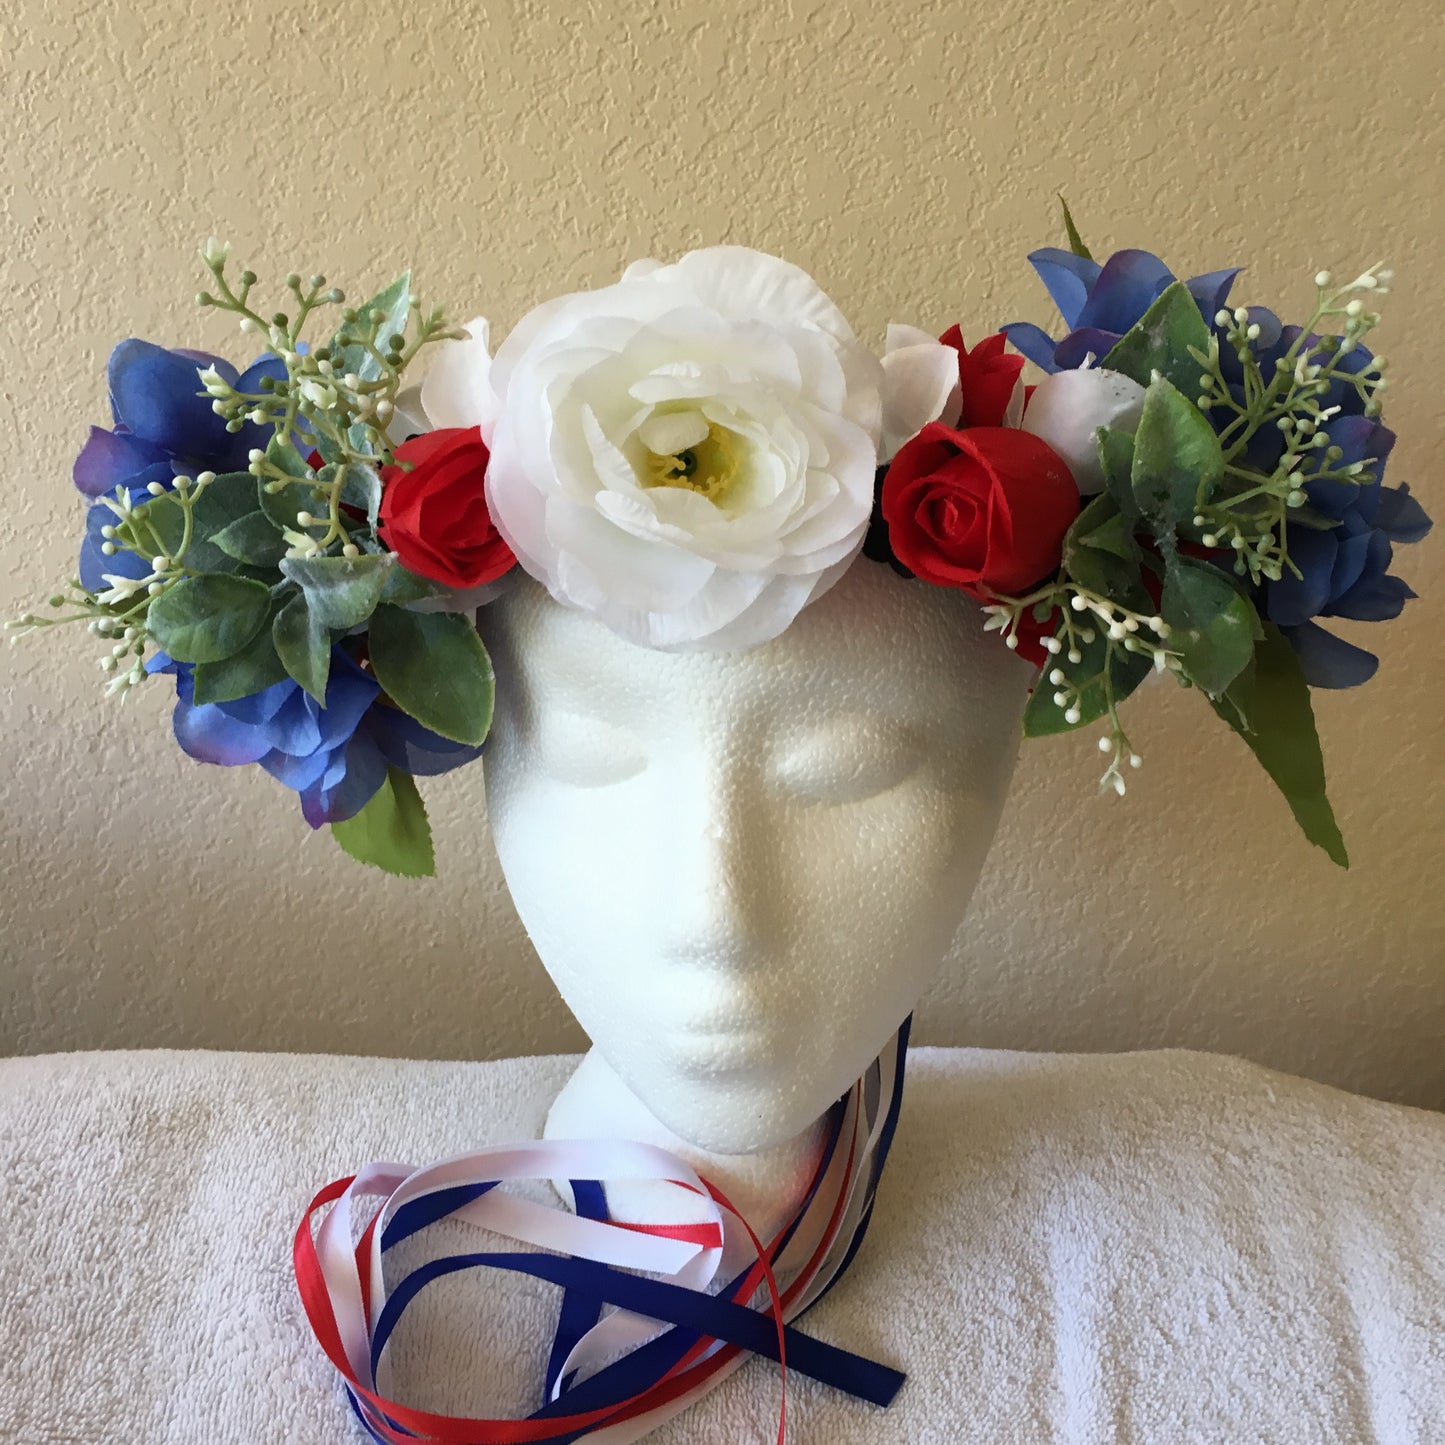 Large Wreath - Red, white, & blue flowers